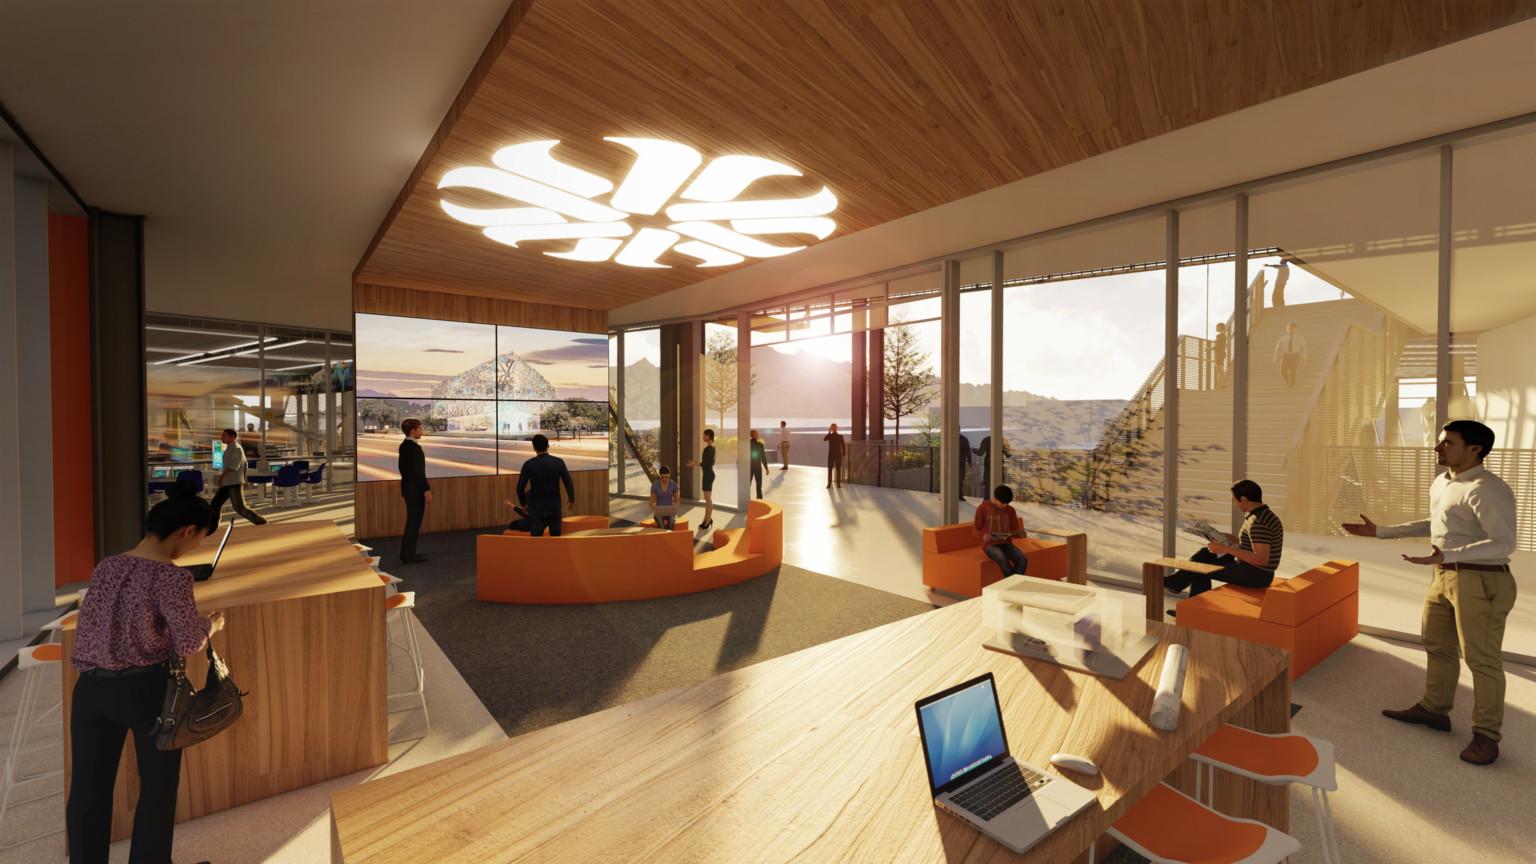 Learning space with flexible and ergonomic seating in white and glass walled room with wood details. Logo illuminated above